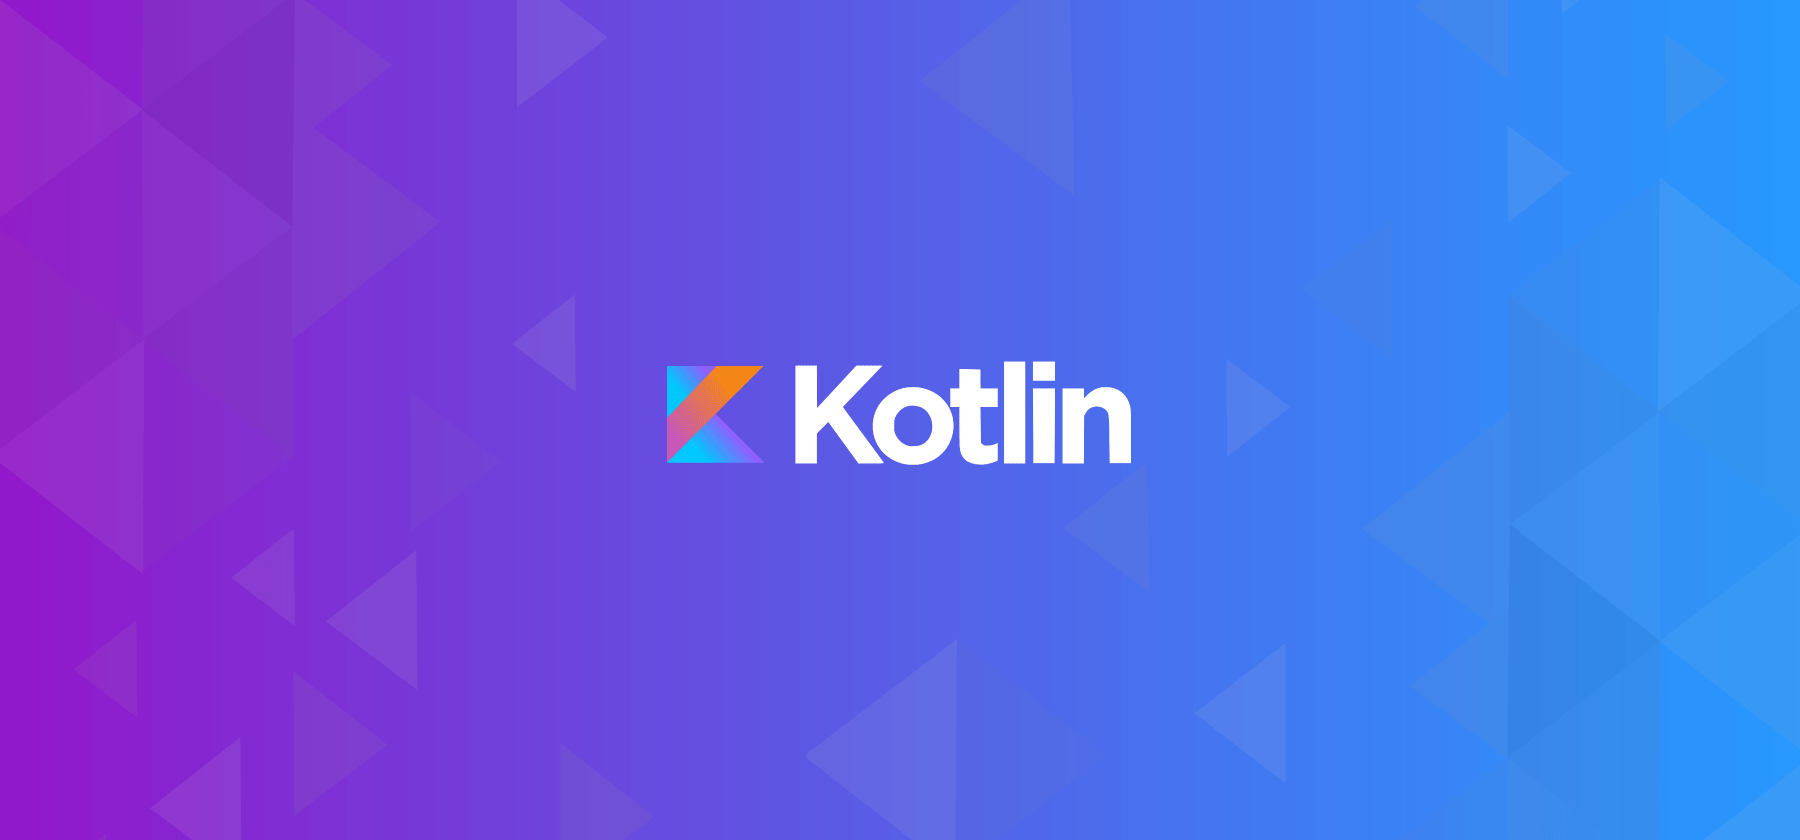 How to make an HTTP Request with SSL  certificate in Kotlin using a PEM file